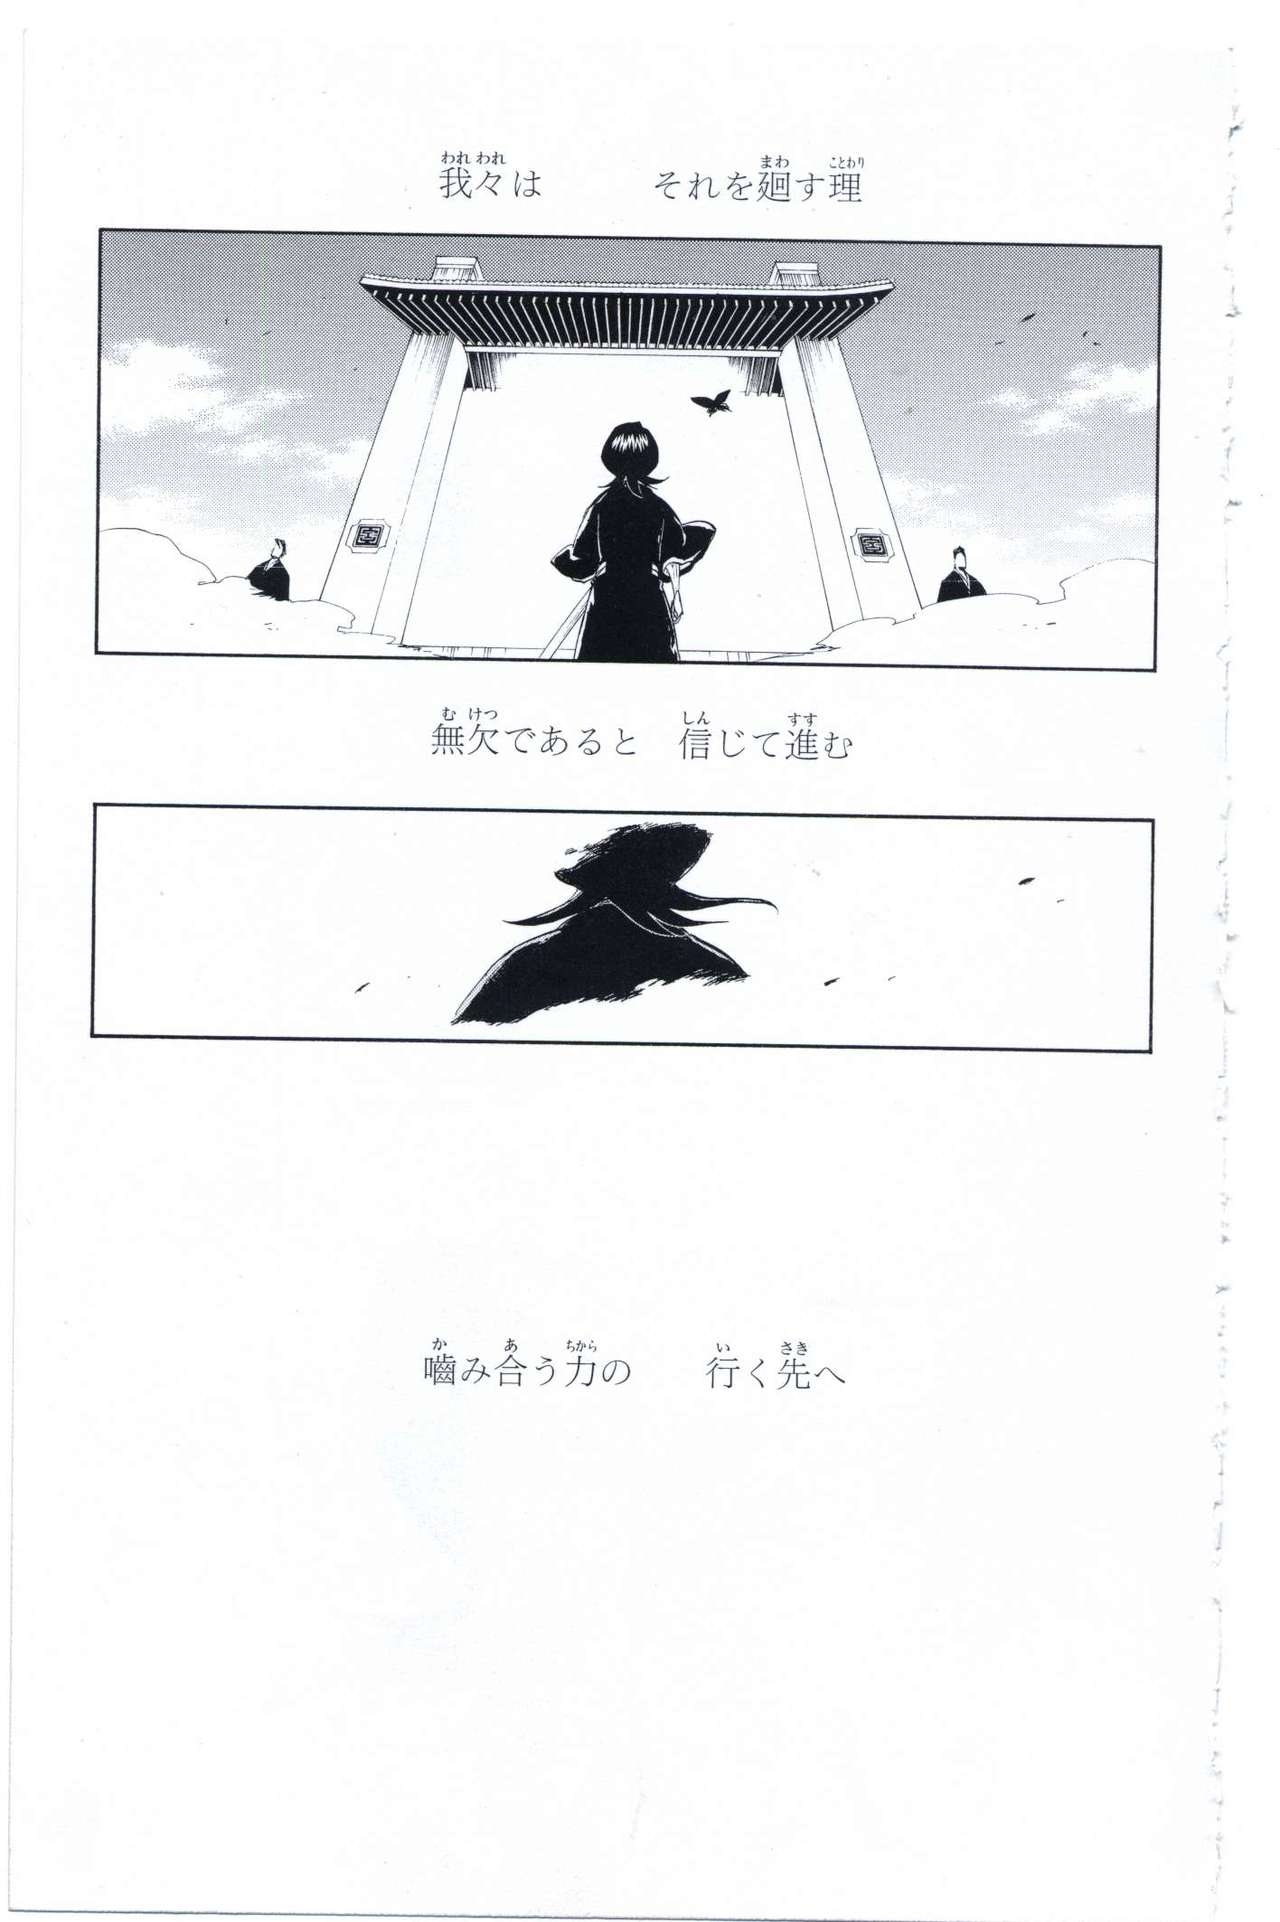 Bleach: Official Animation Book VIBEs 213